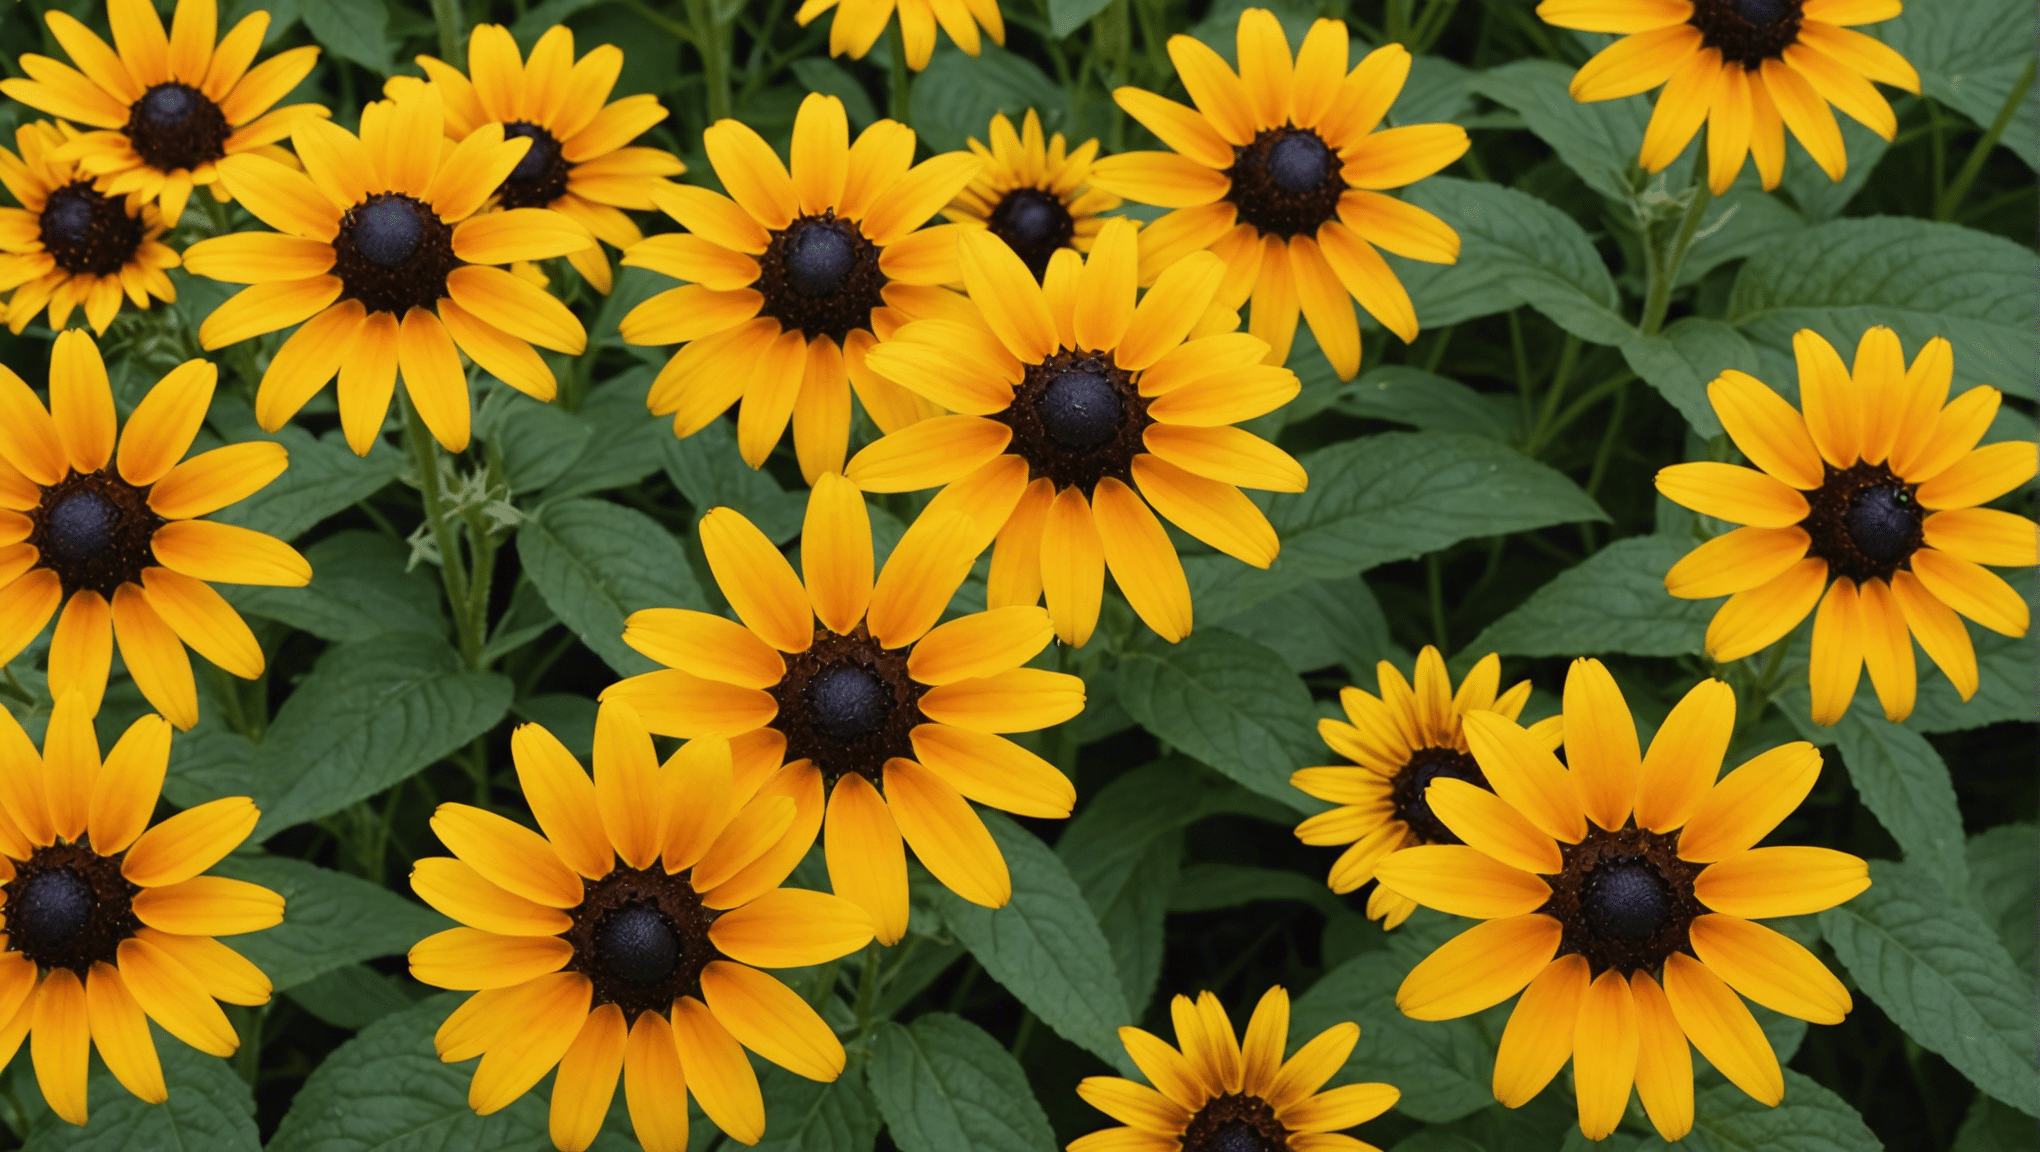 discover expert tips for successfully planting black eyed susan seeds and enjoy a blooming garden all season long.